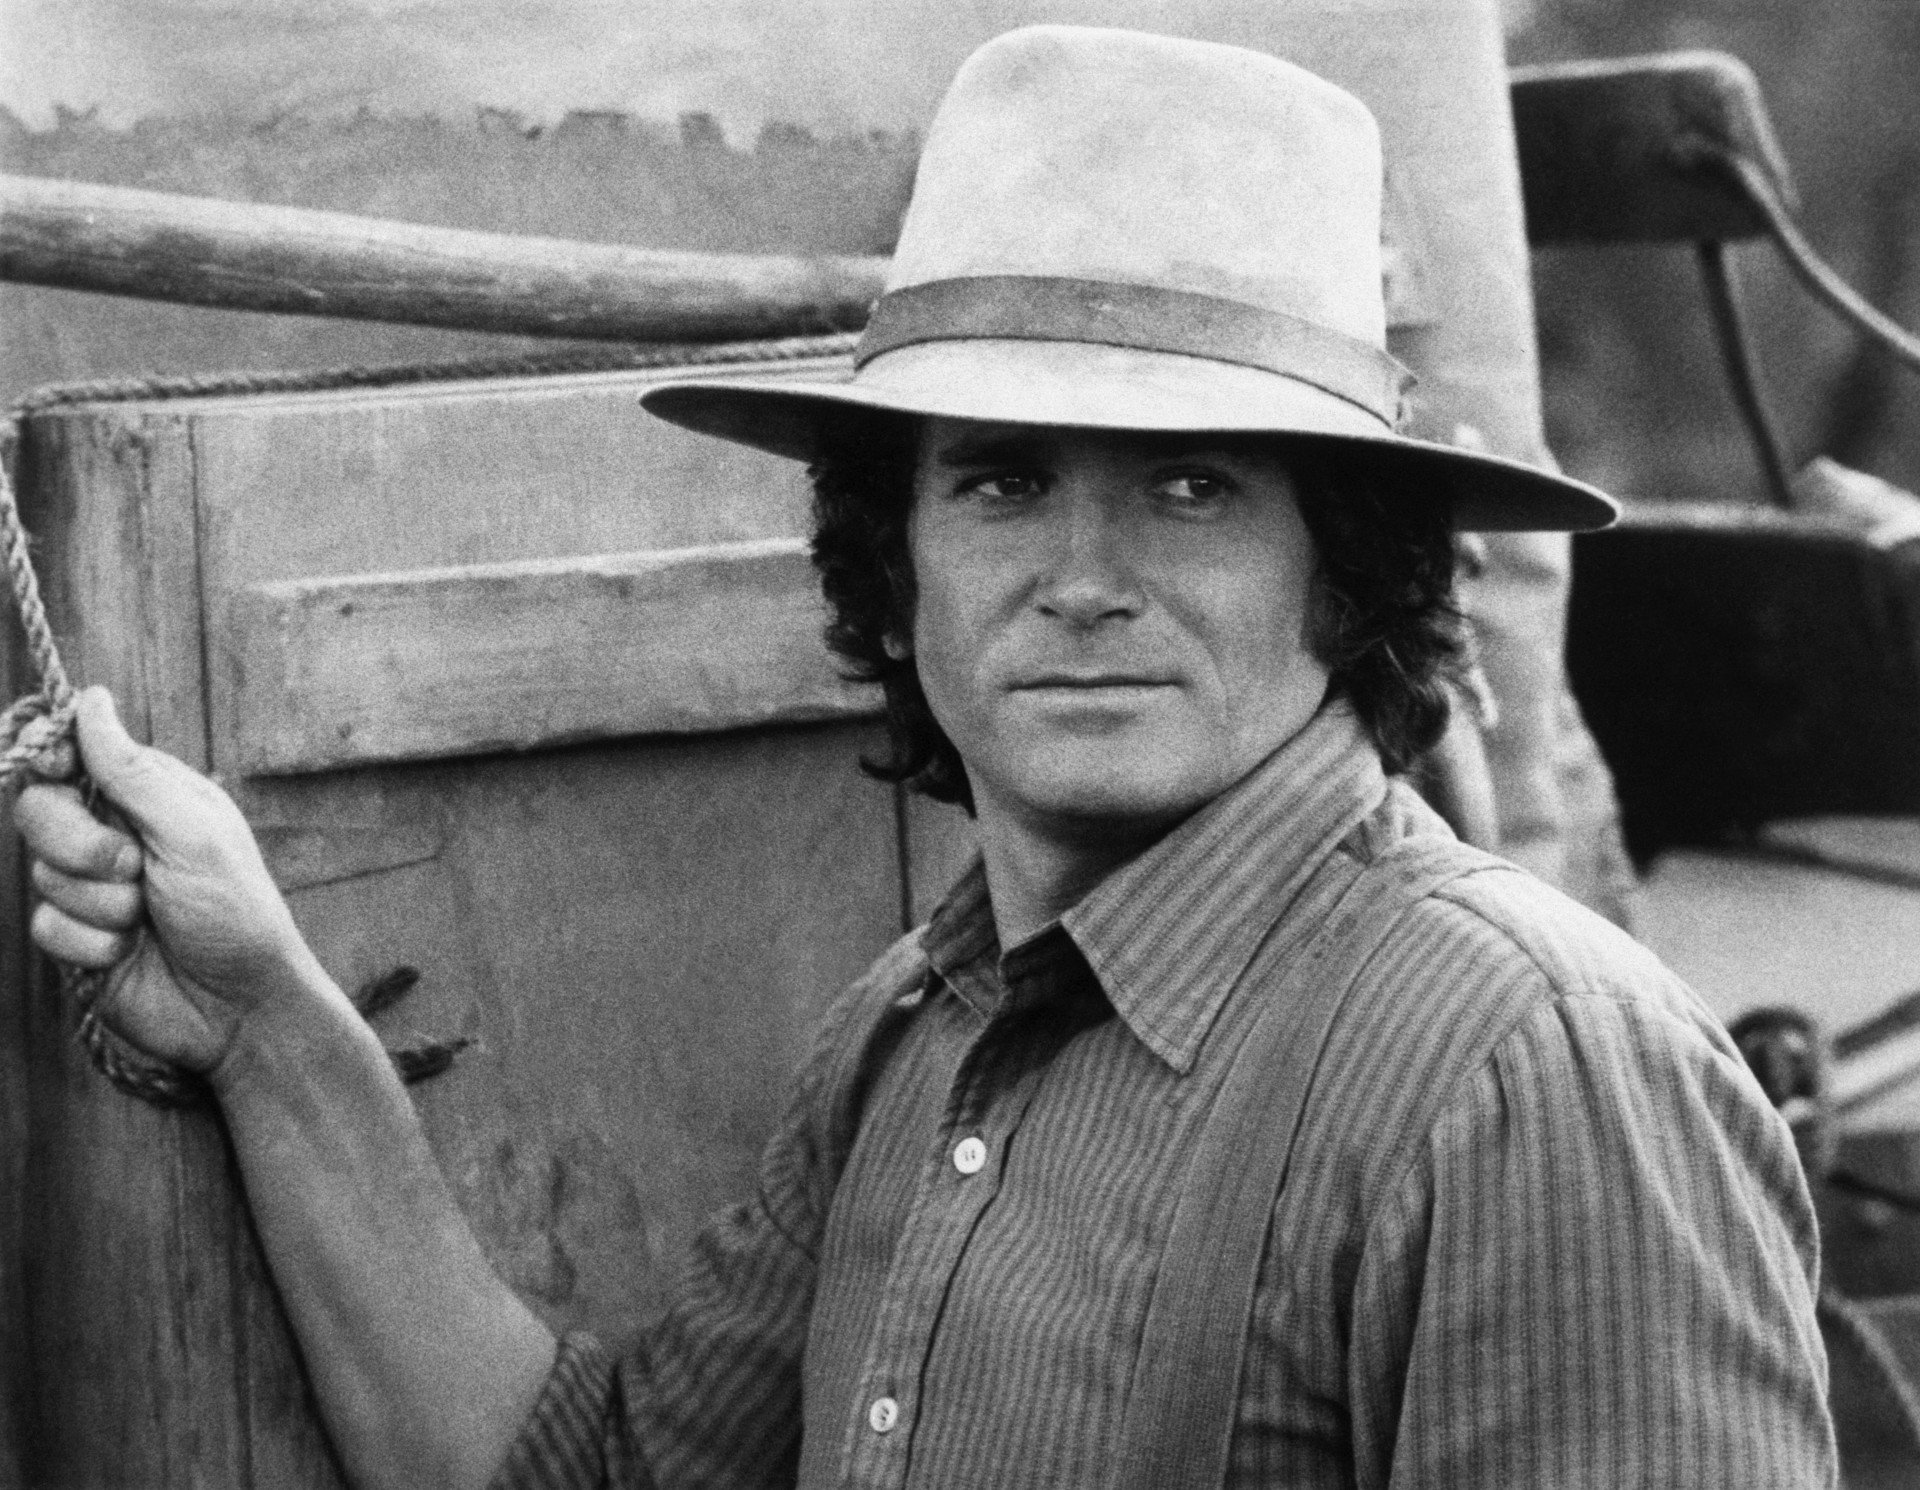 Michael Landon as Charles Ingalls on Little House on the Prairie.